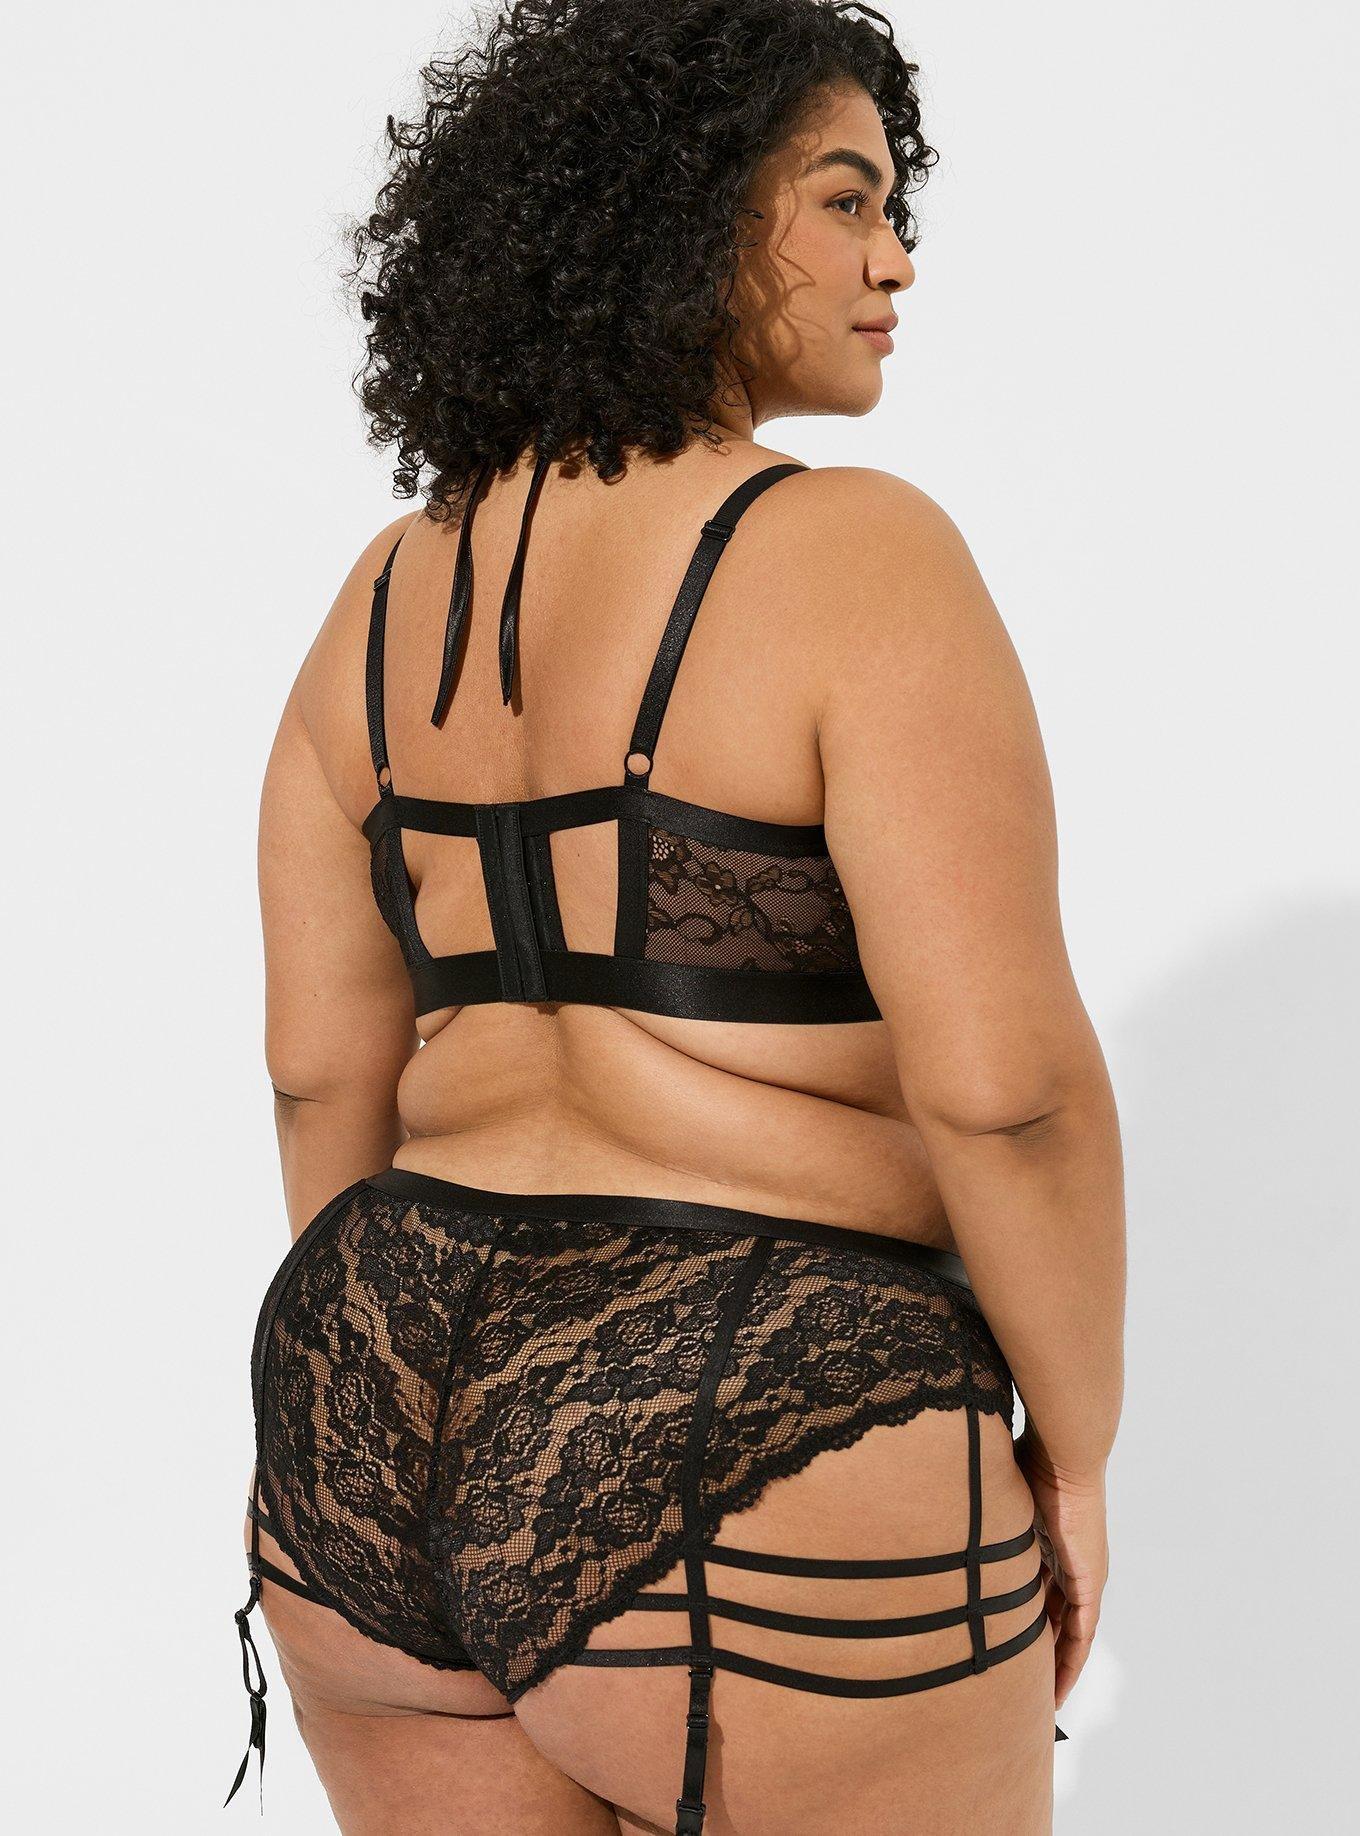 Plus Size - Lace Thong Panty With Open Gusset and Cage Garter - Torrid